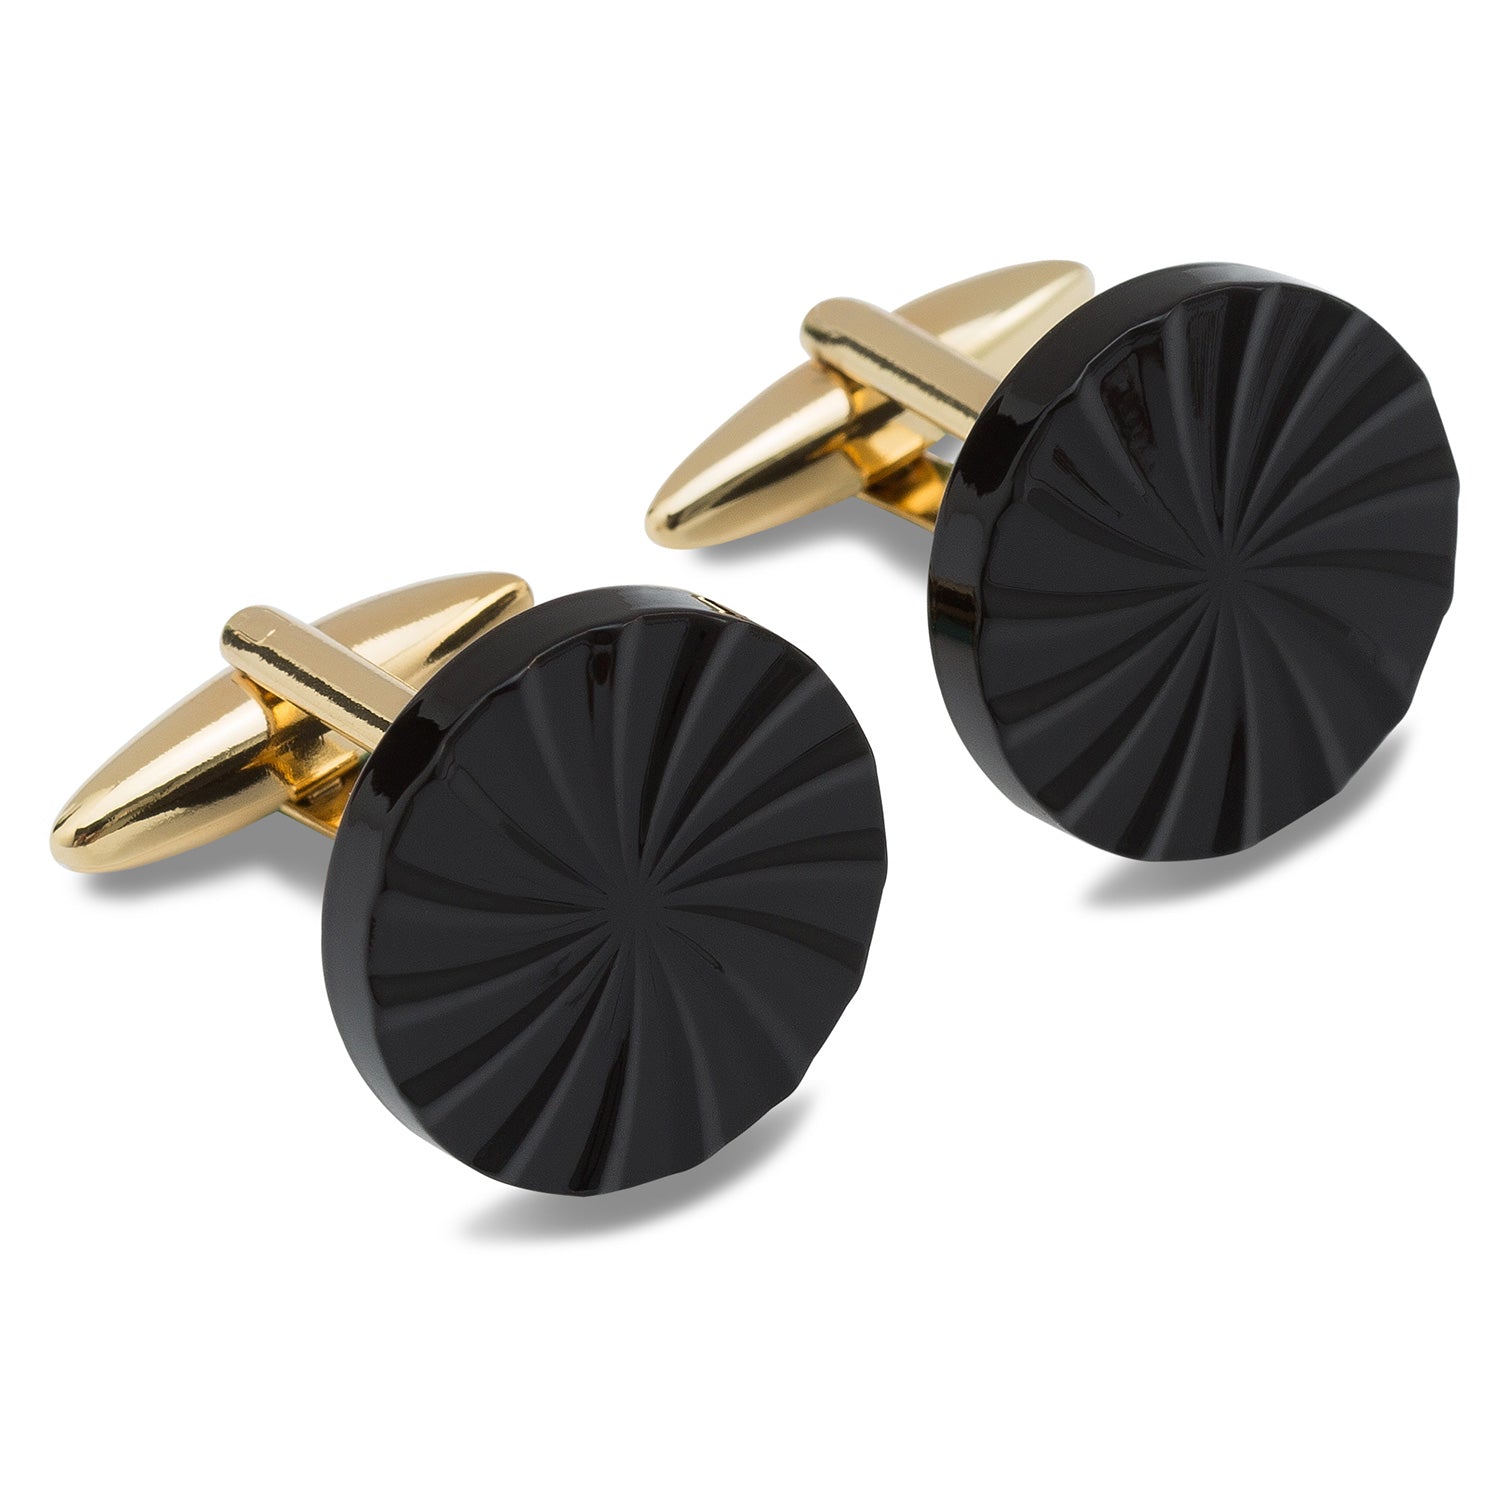 Mr. Mysterious Black and Gold Cufflink